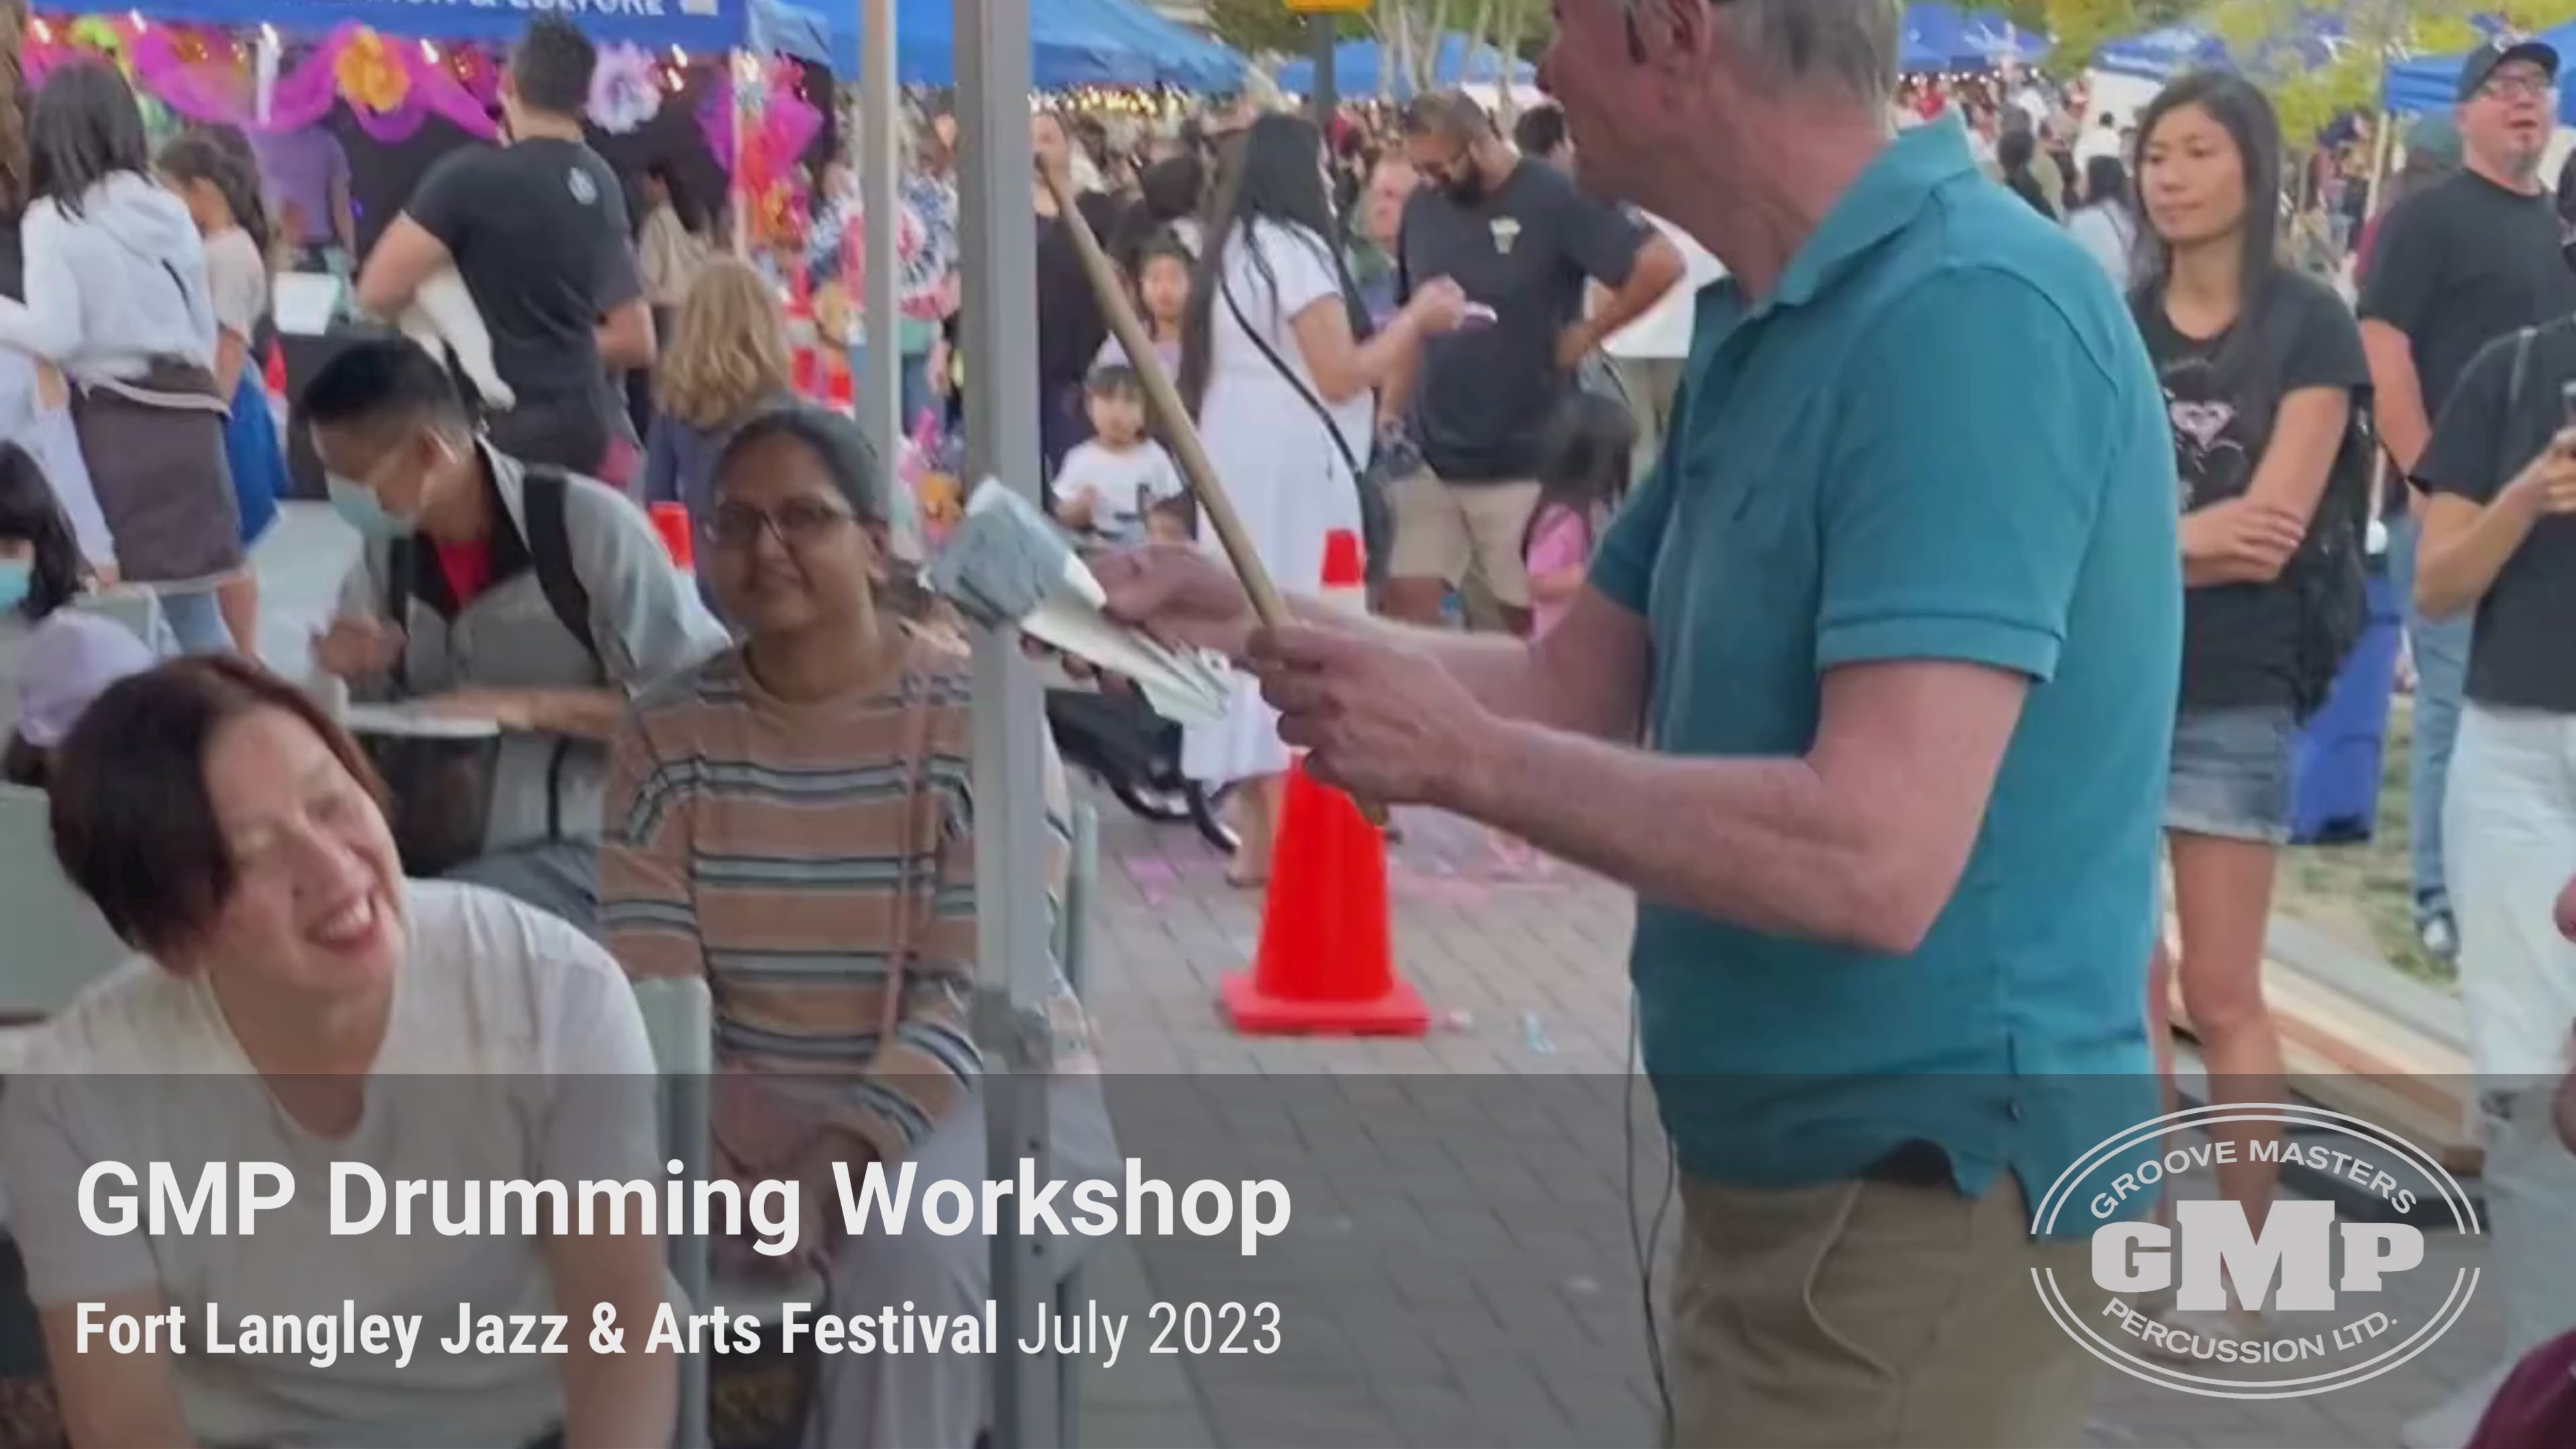 Load video: Groove Masters Percussion drumming workshop at langley jazz and arts festival, july 2023